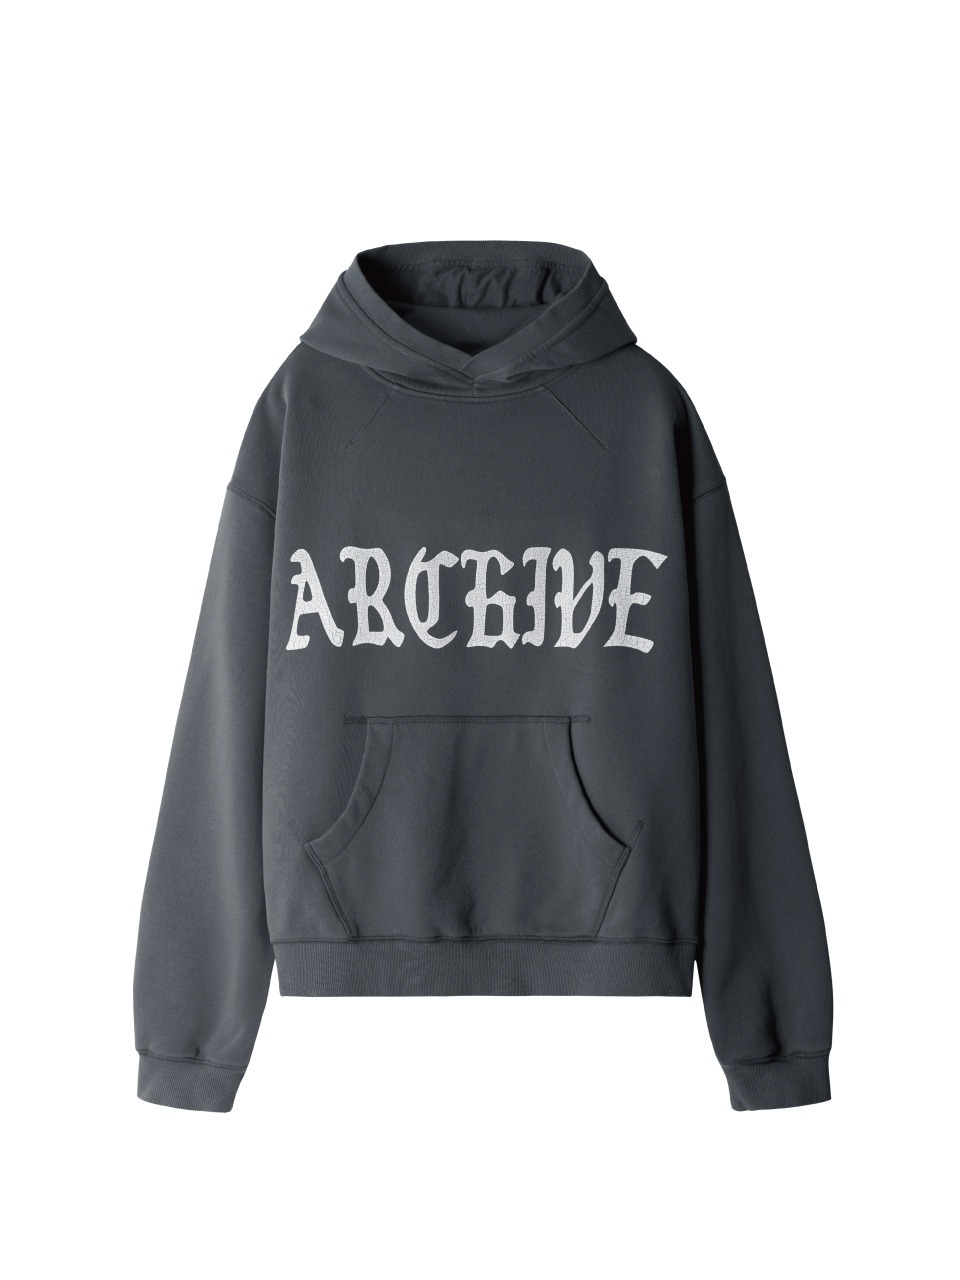 ETCE - ARCHIVE V RIP HOODIE (COOL GRAY)